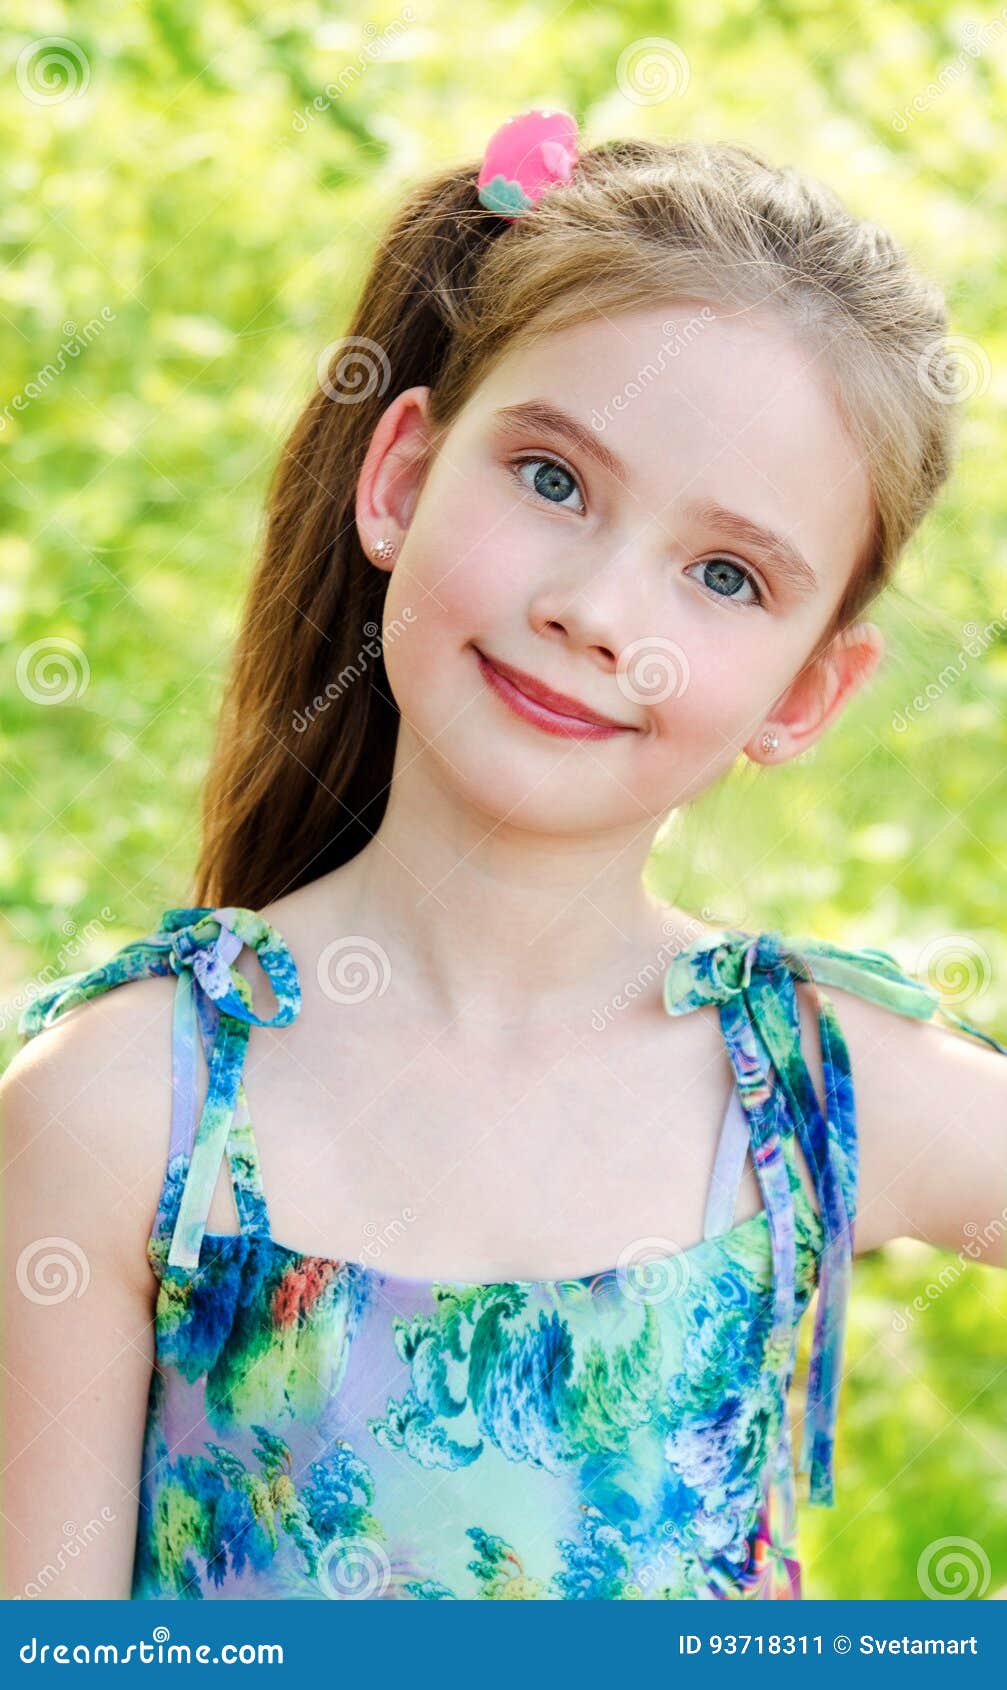 Portrait of Adorable Smiling Little Girl Outdoor Stock Image - Image of ...